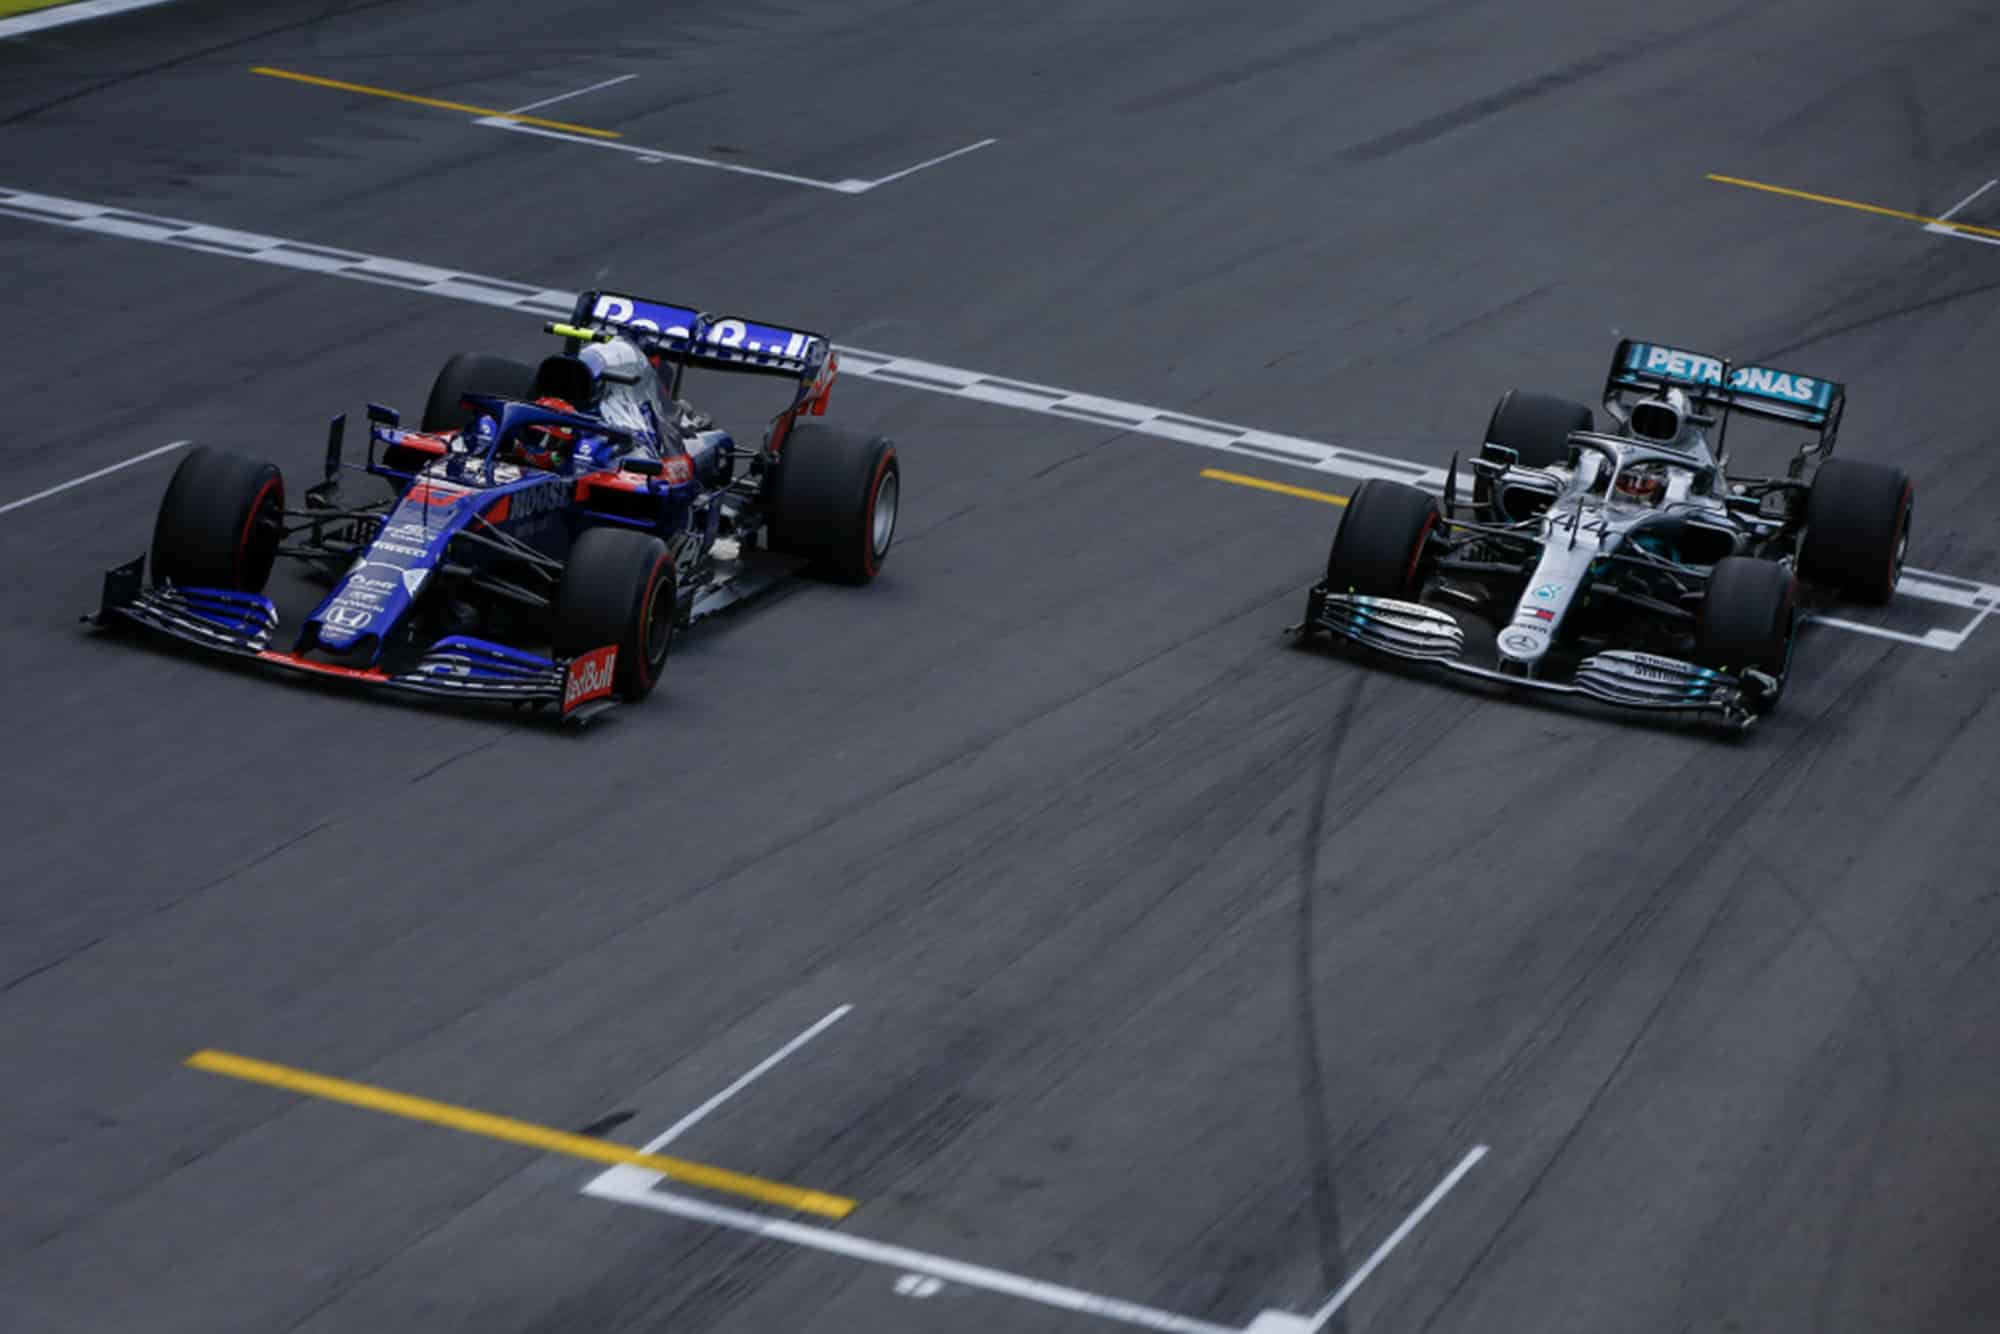 Pierre Gasly's Toro Rosso Honda out-drags Lewis Hamilton's Mercedes for second during the 2019 Brazilian Grand Prix